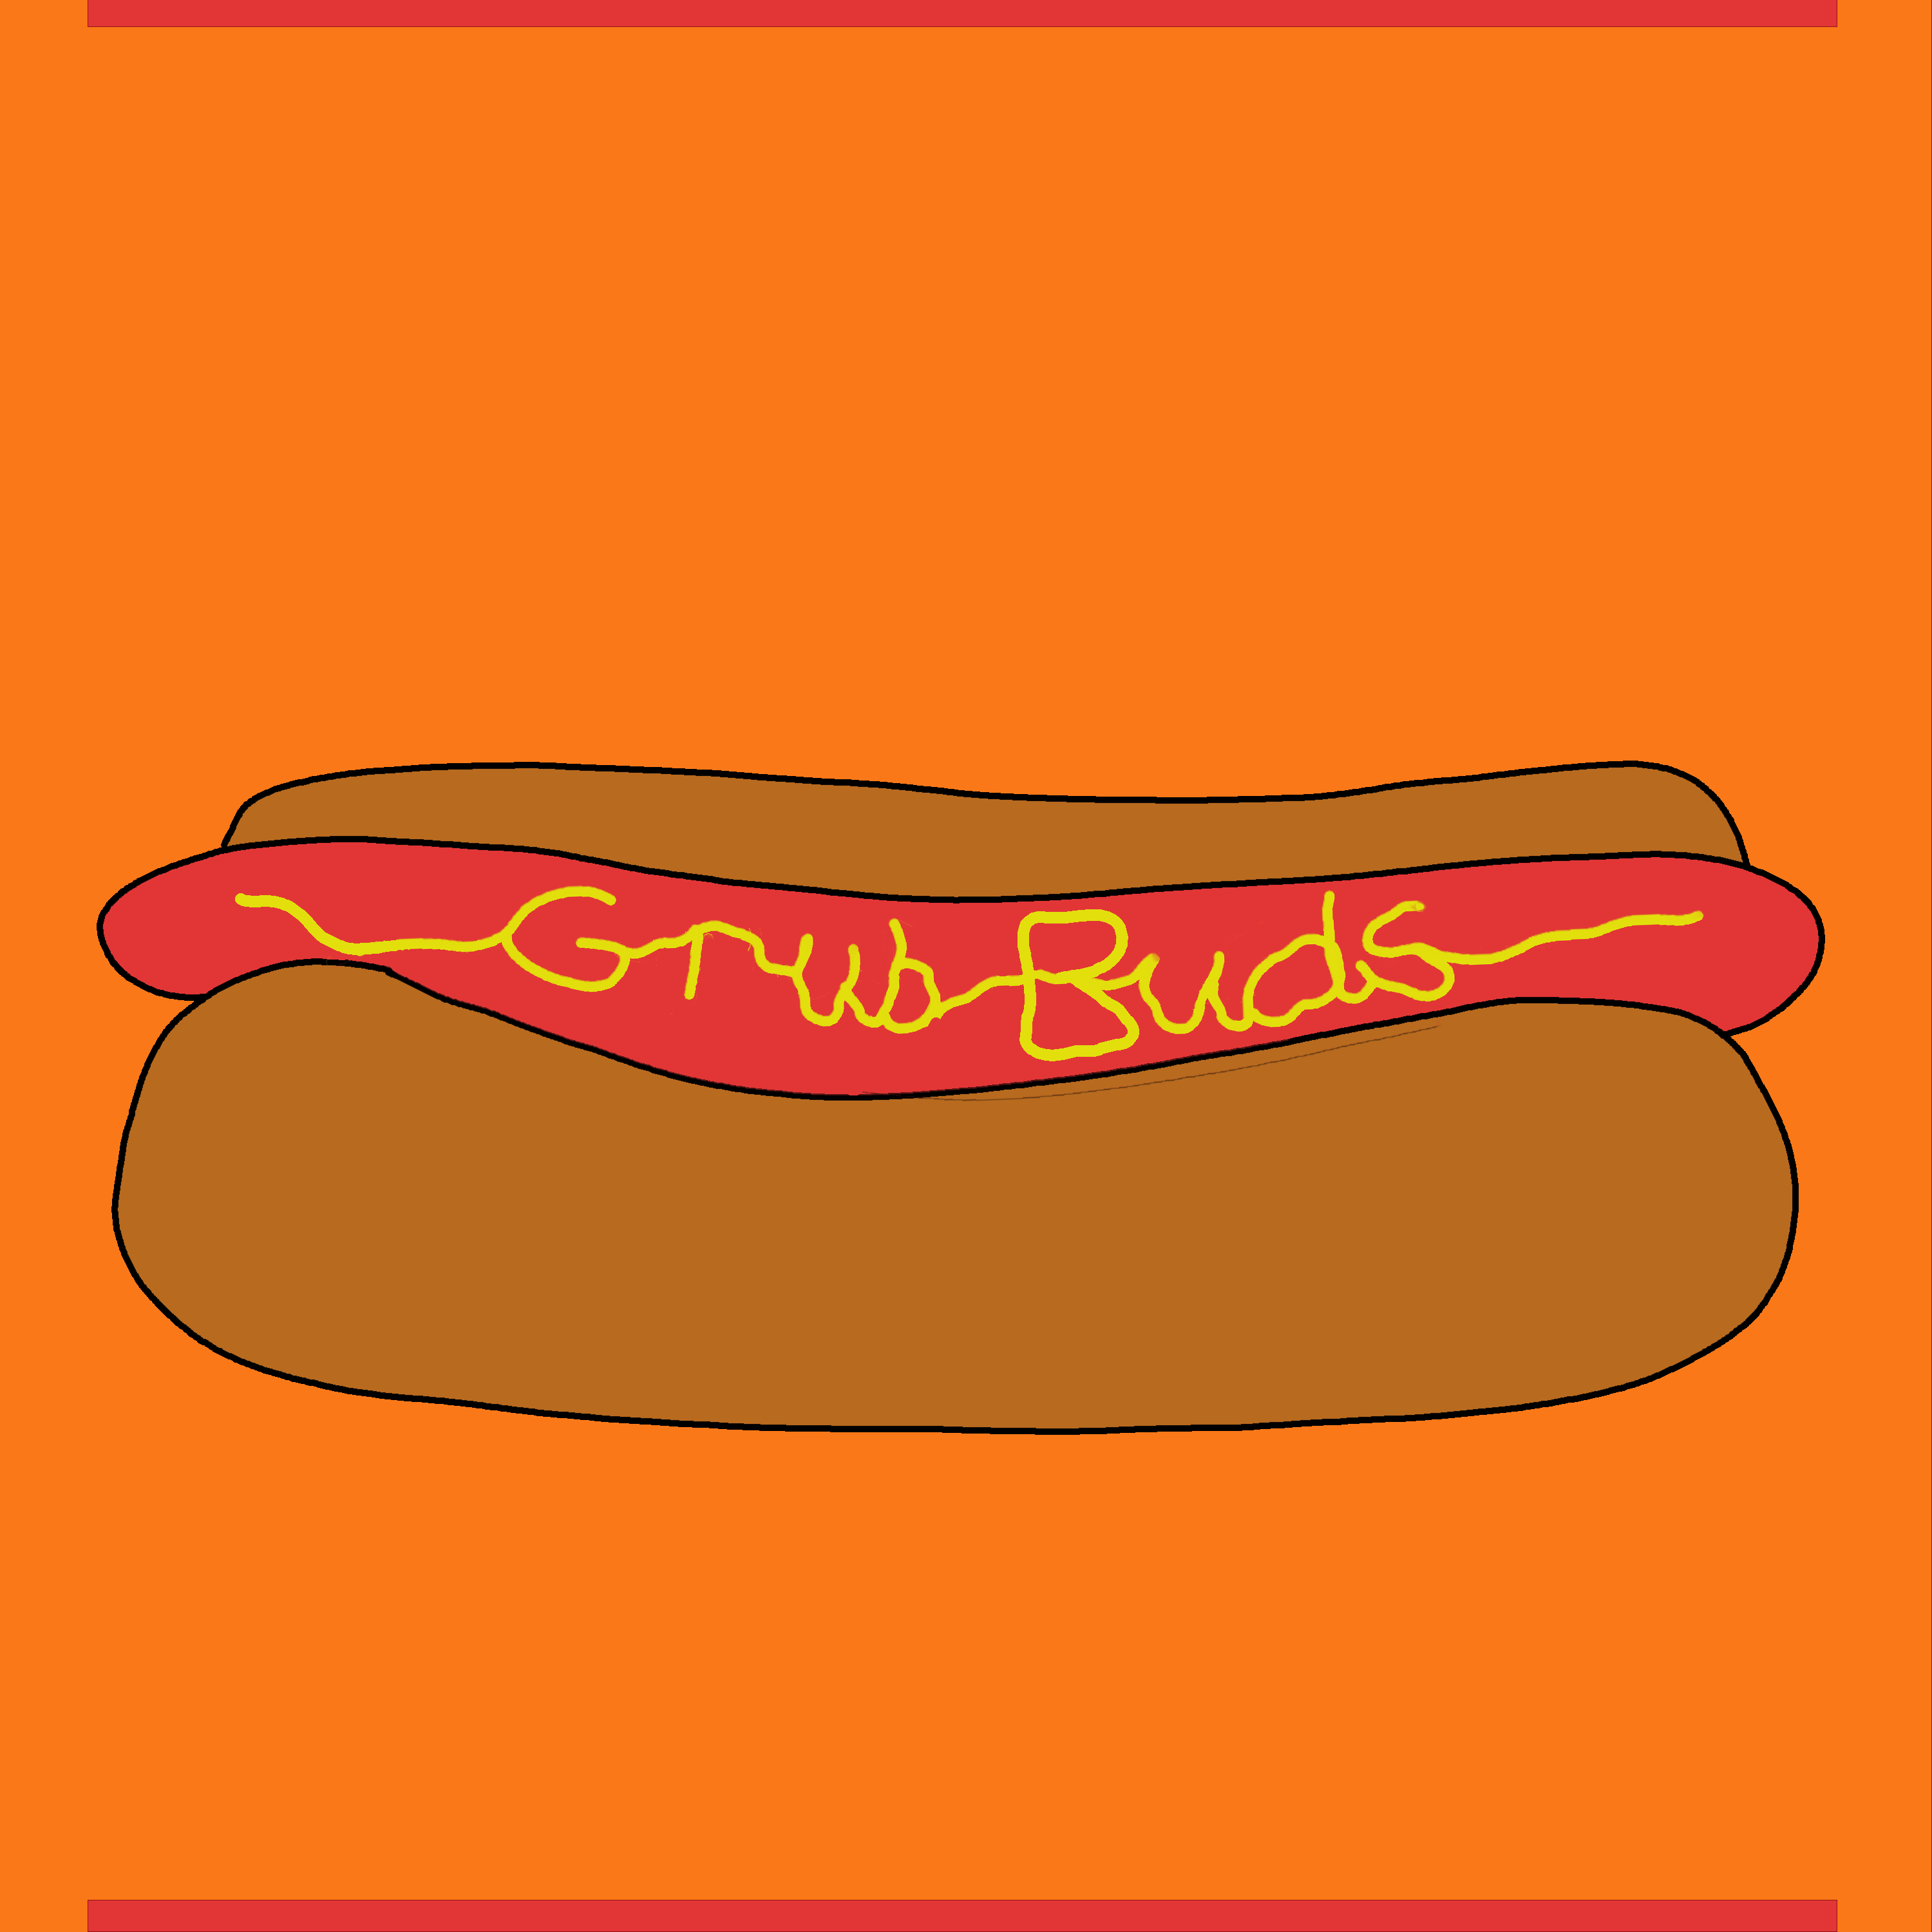 Grub Buds #80 - The Great American Burger Cook Off